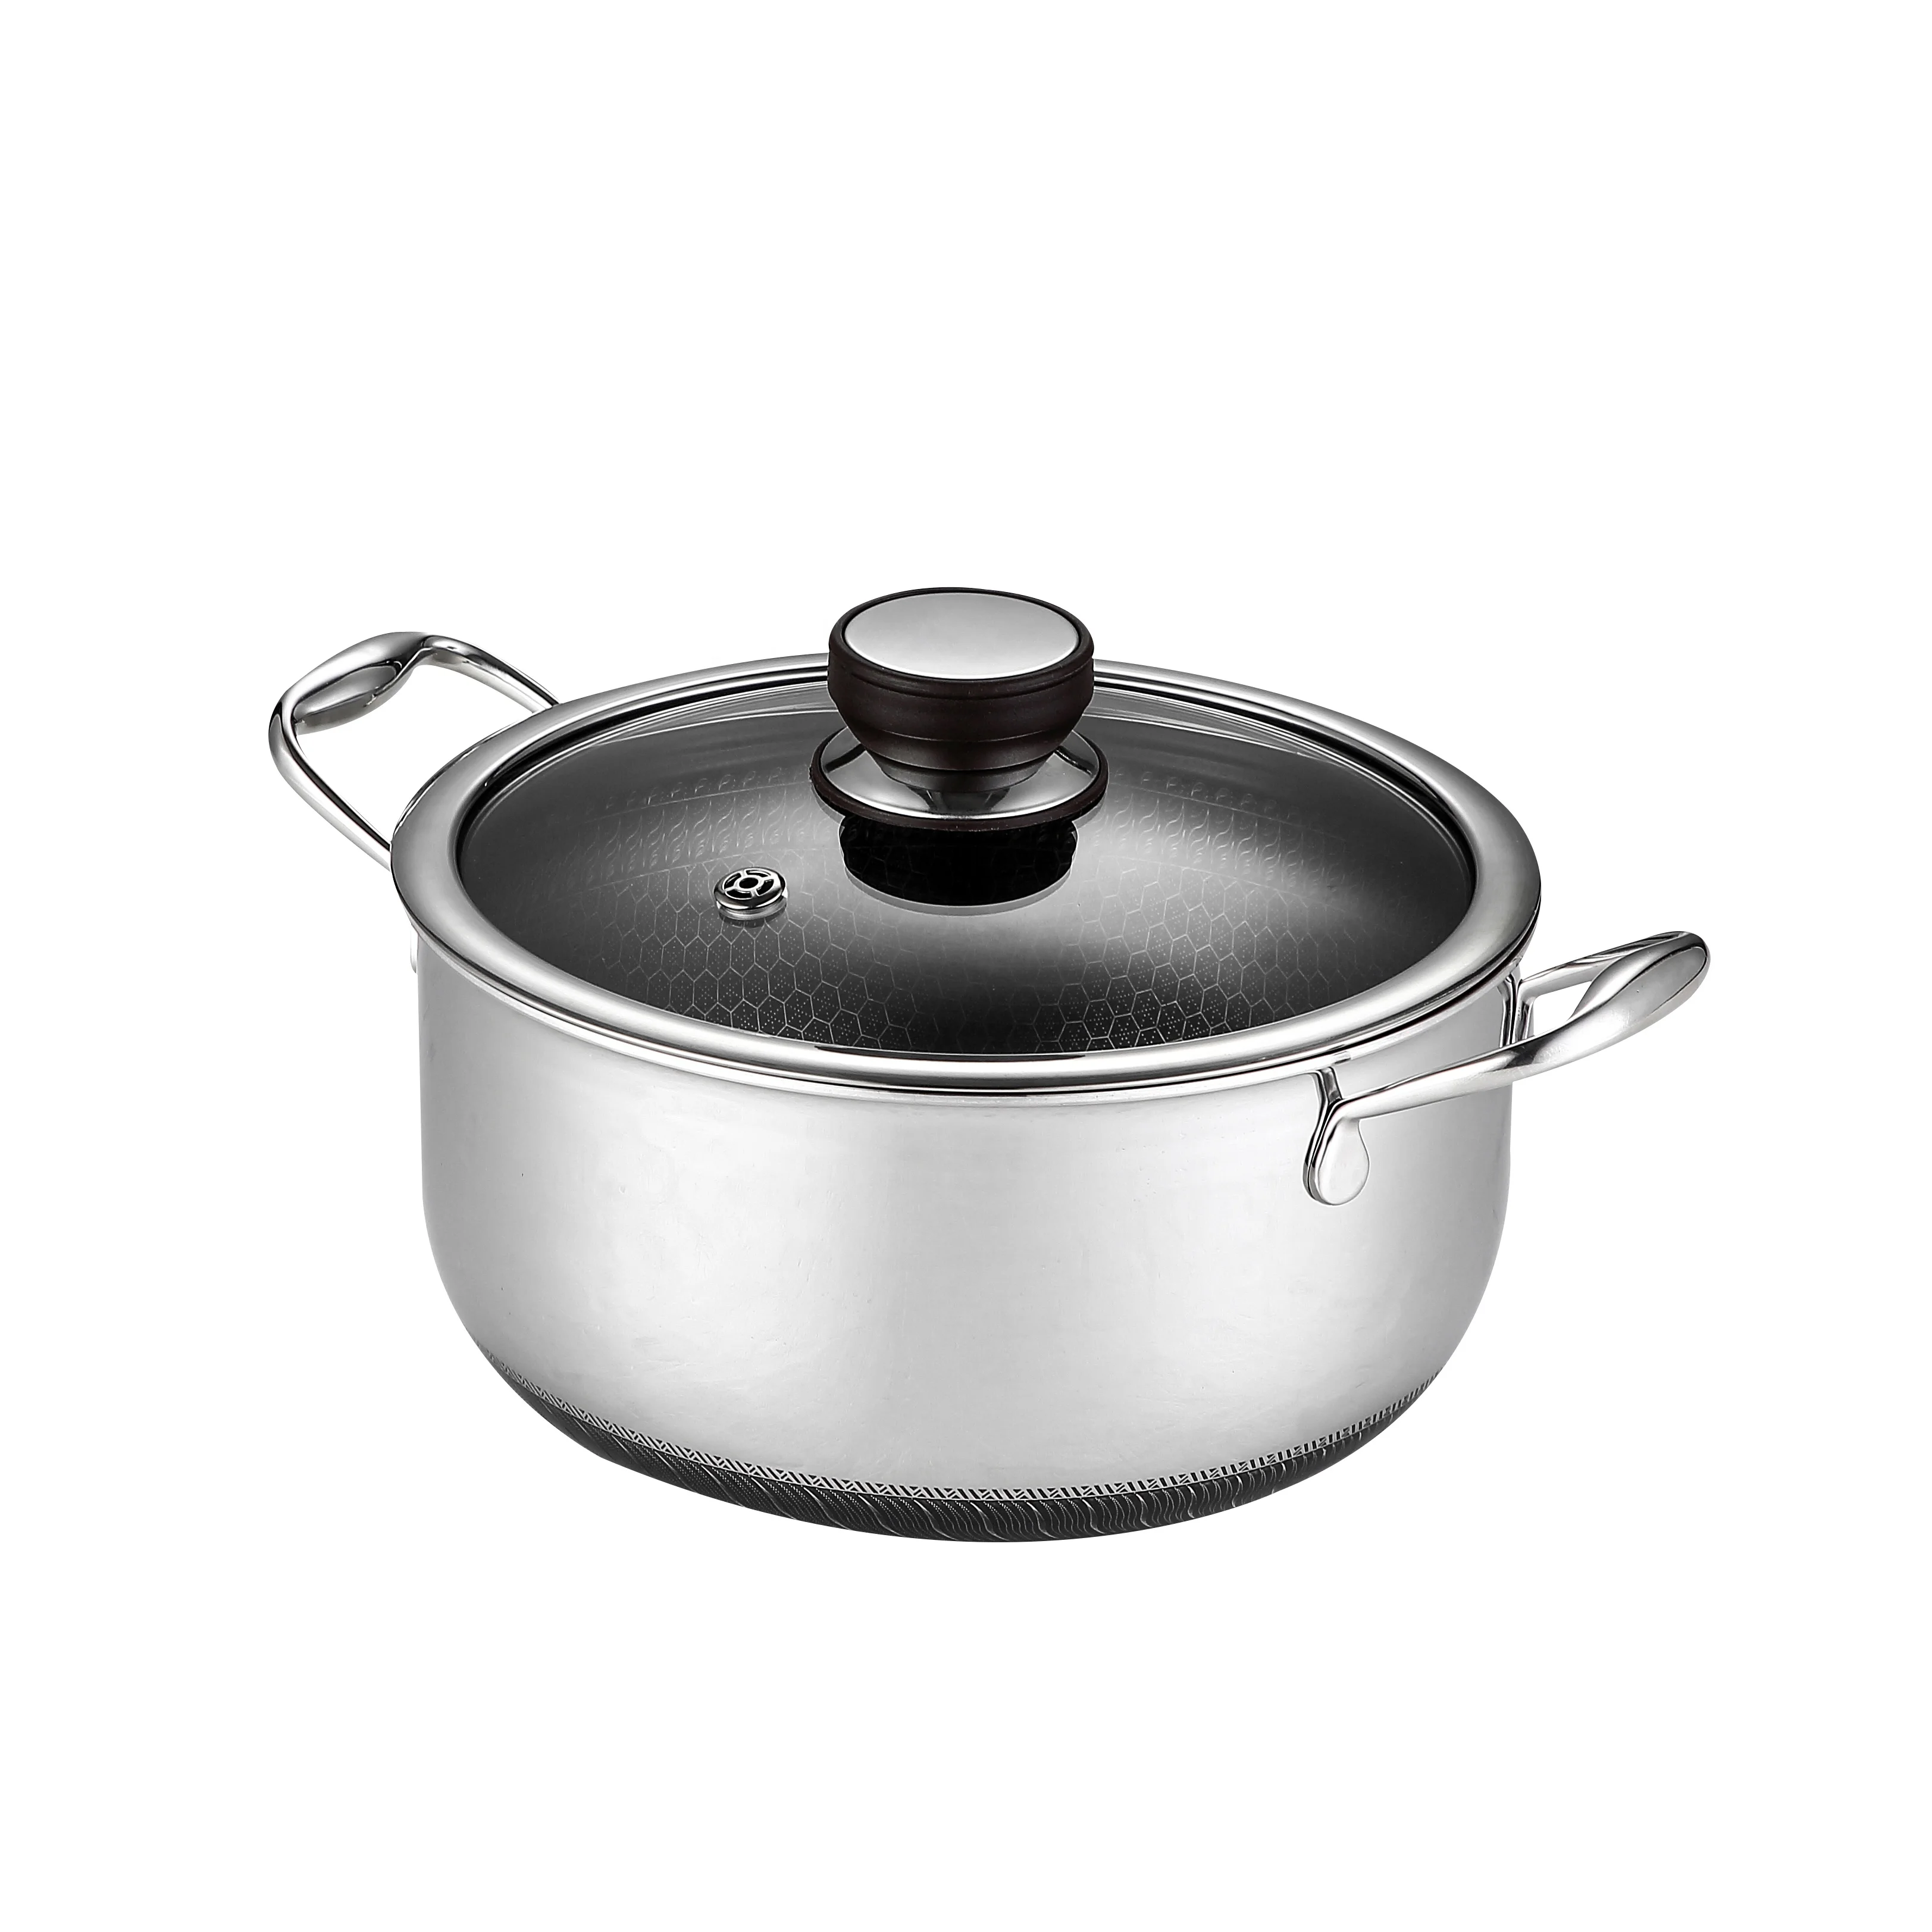 5QT Triply Stainless Steel Soup Stock Pot Double Ears Nonstick Honeycomb Hexclad Cookware Cooking Pot